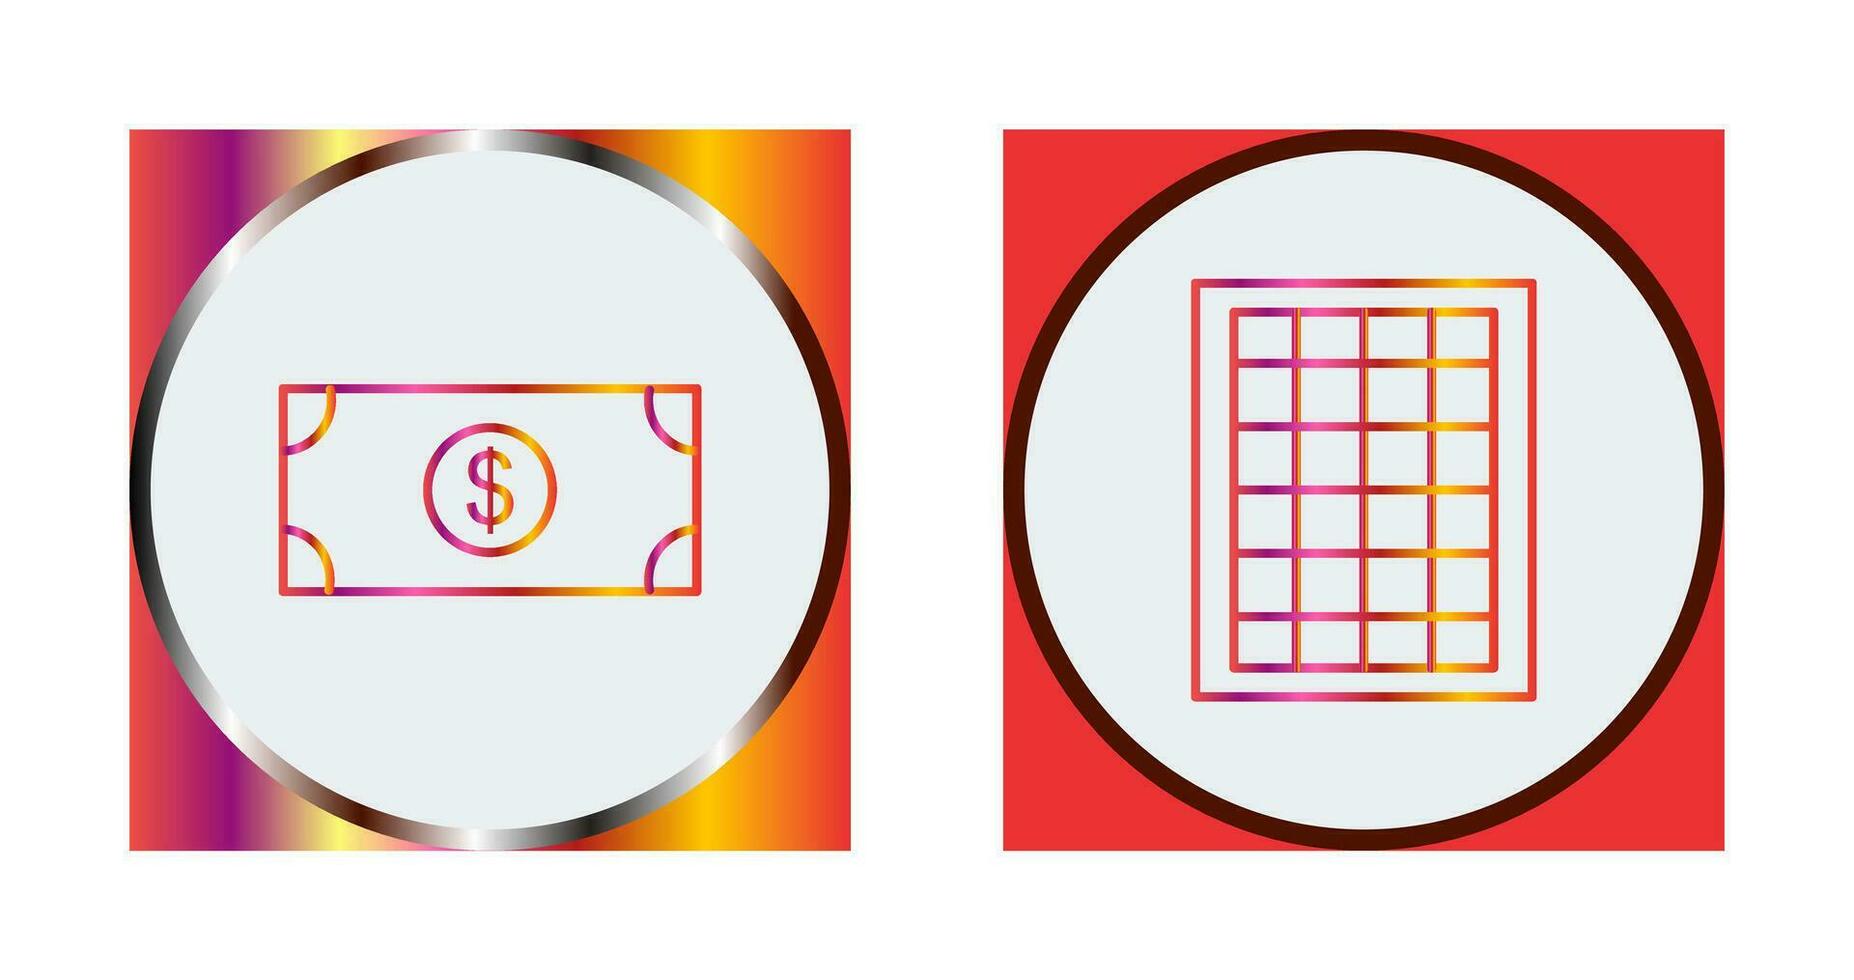 dollar bill and table of rates  Icon vector